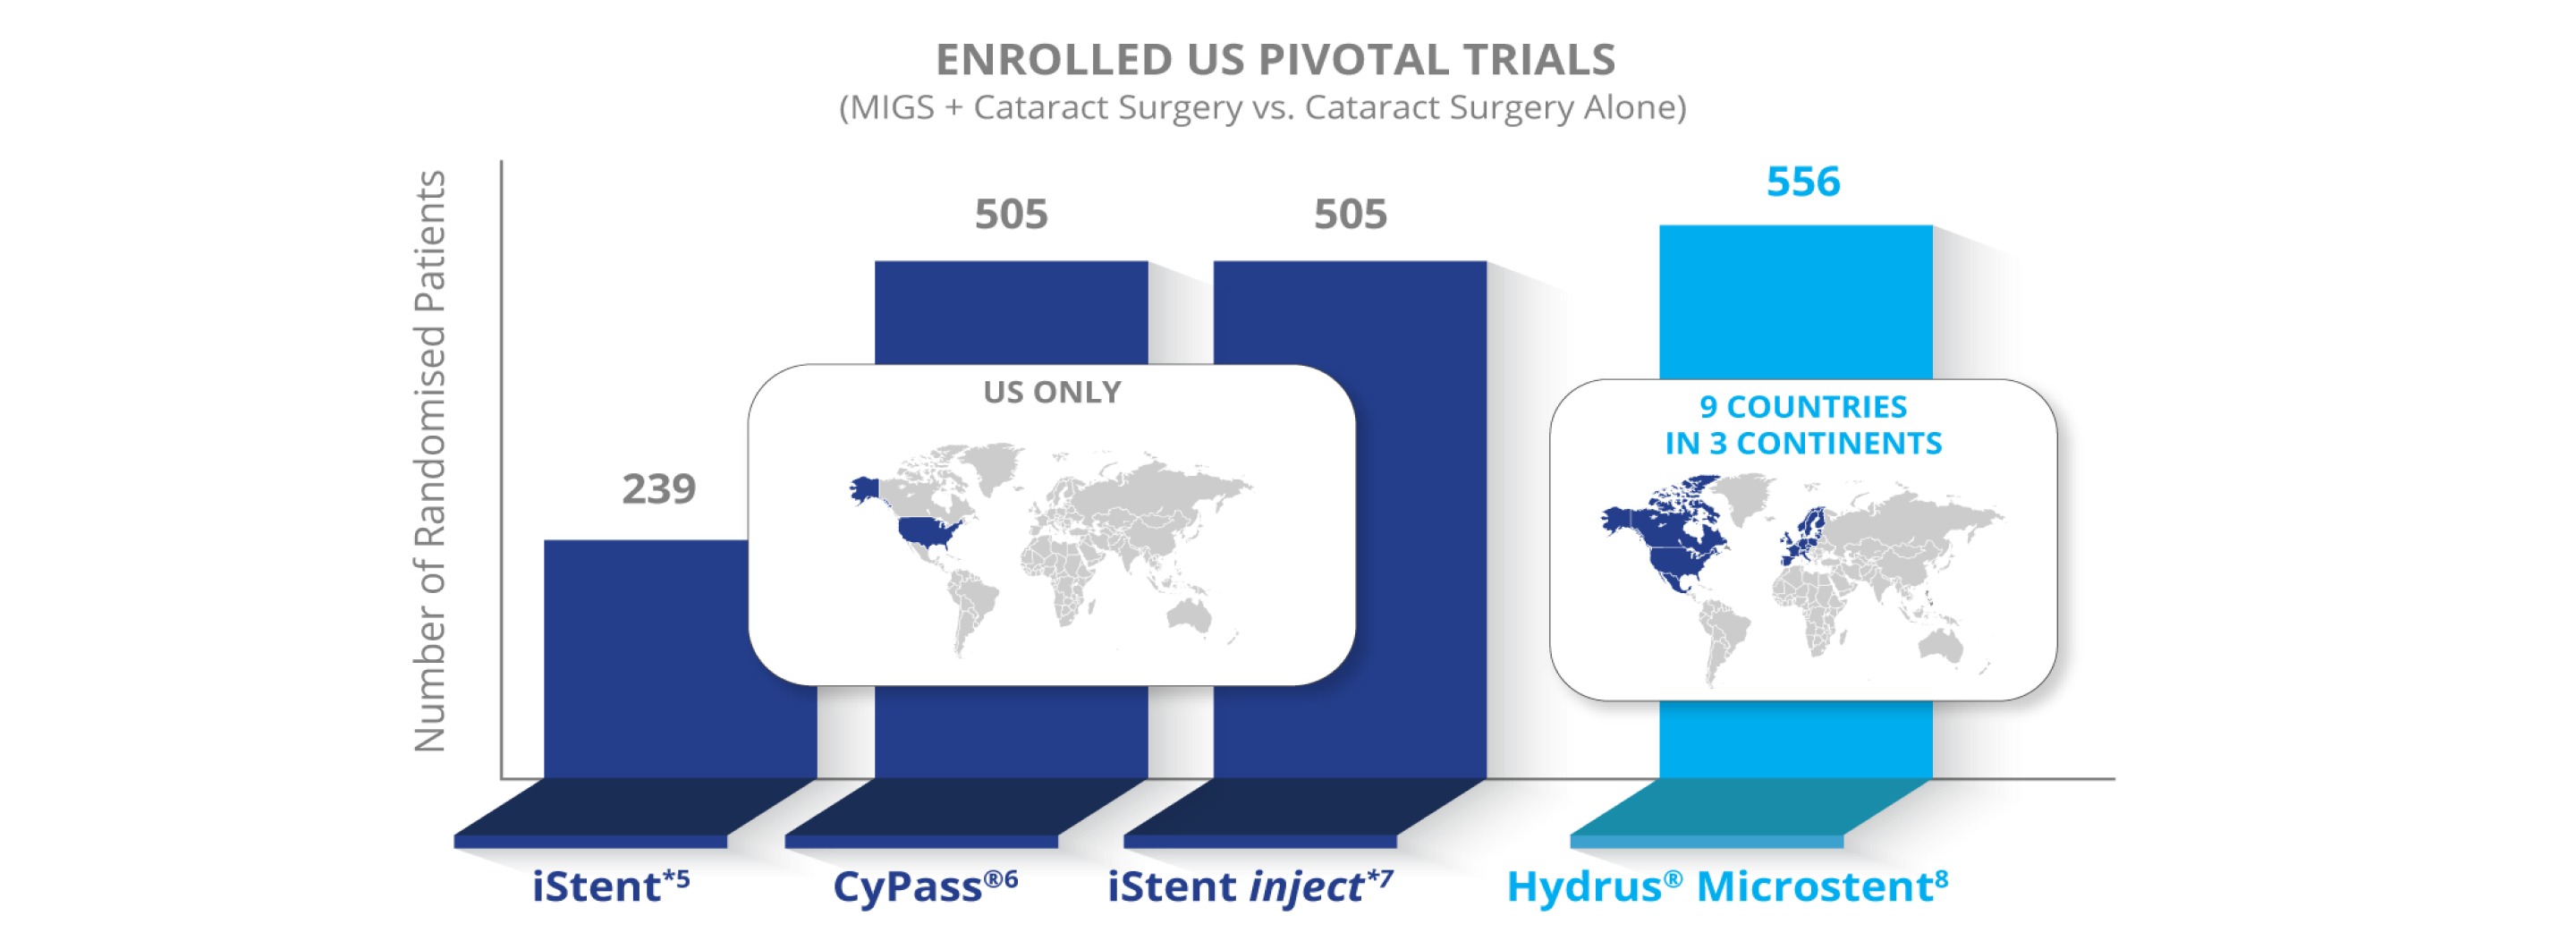 A bar graph indicating the Enrolled US Pivotal Trials for the iStent with 239 randomised patients, CyPass with 505 randomised patients, iStent inject with 505 randomised patients and the Hydrus Microstent with 556 randomised patients.